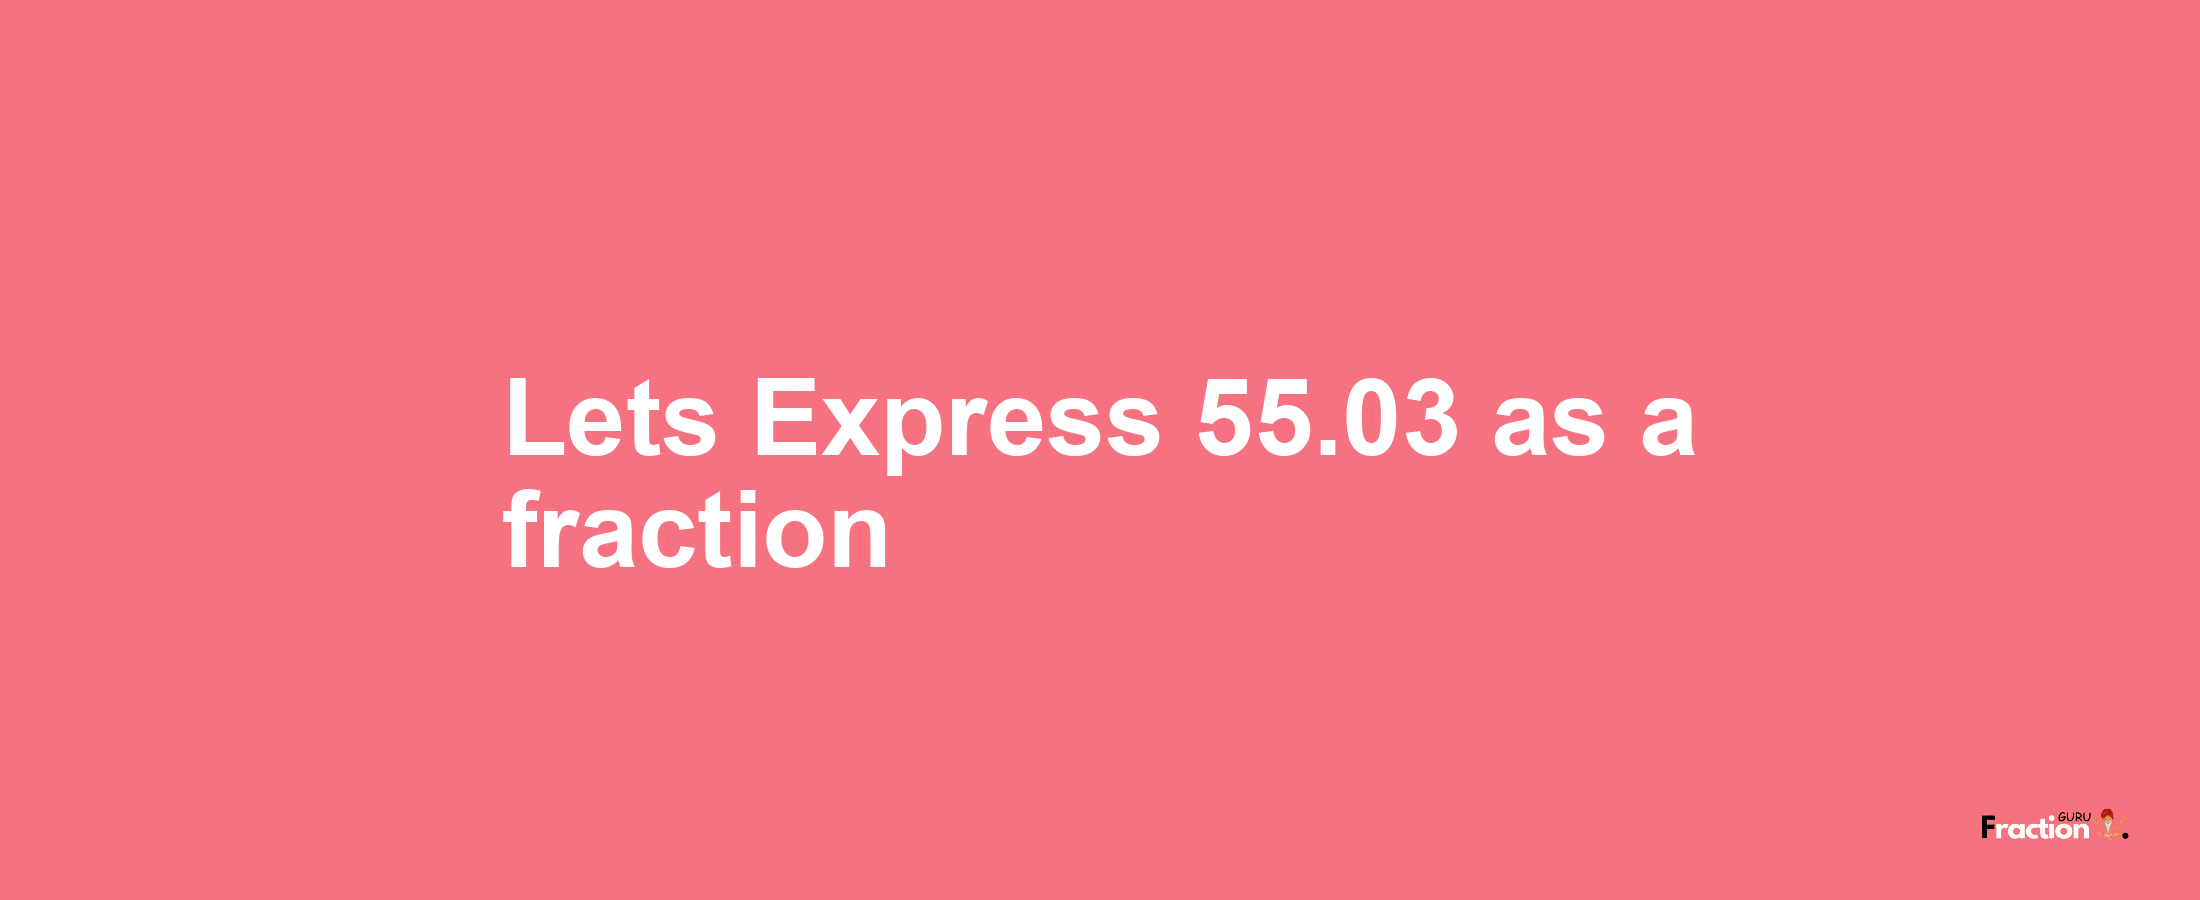 Lets Express 55.03 as afraction